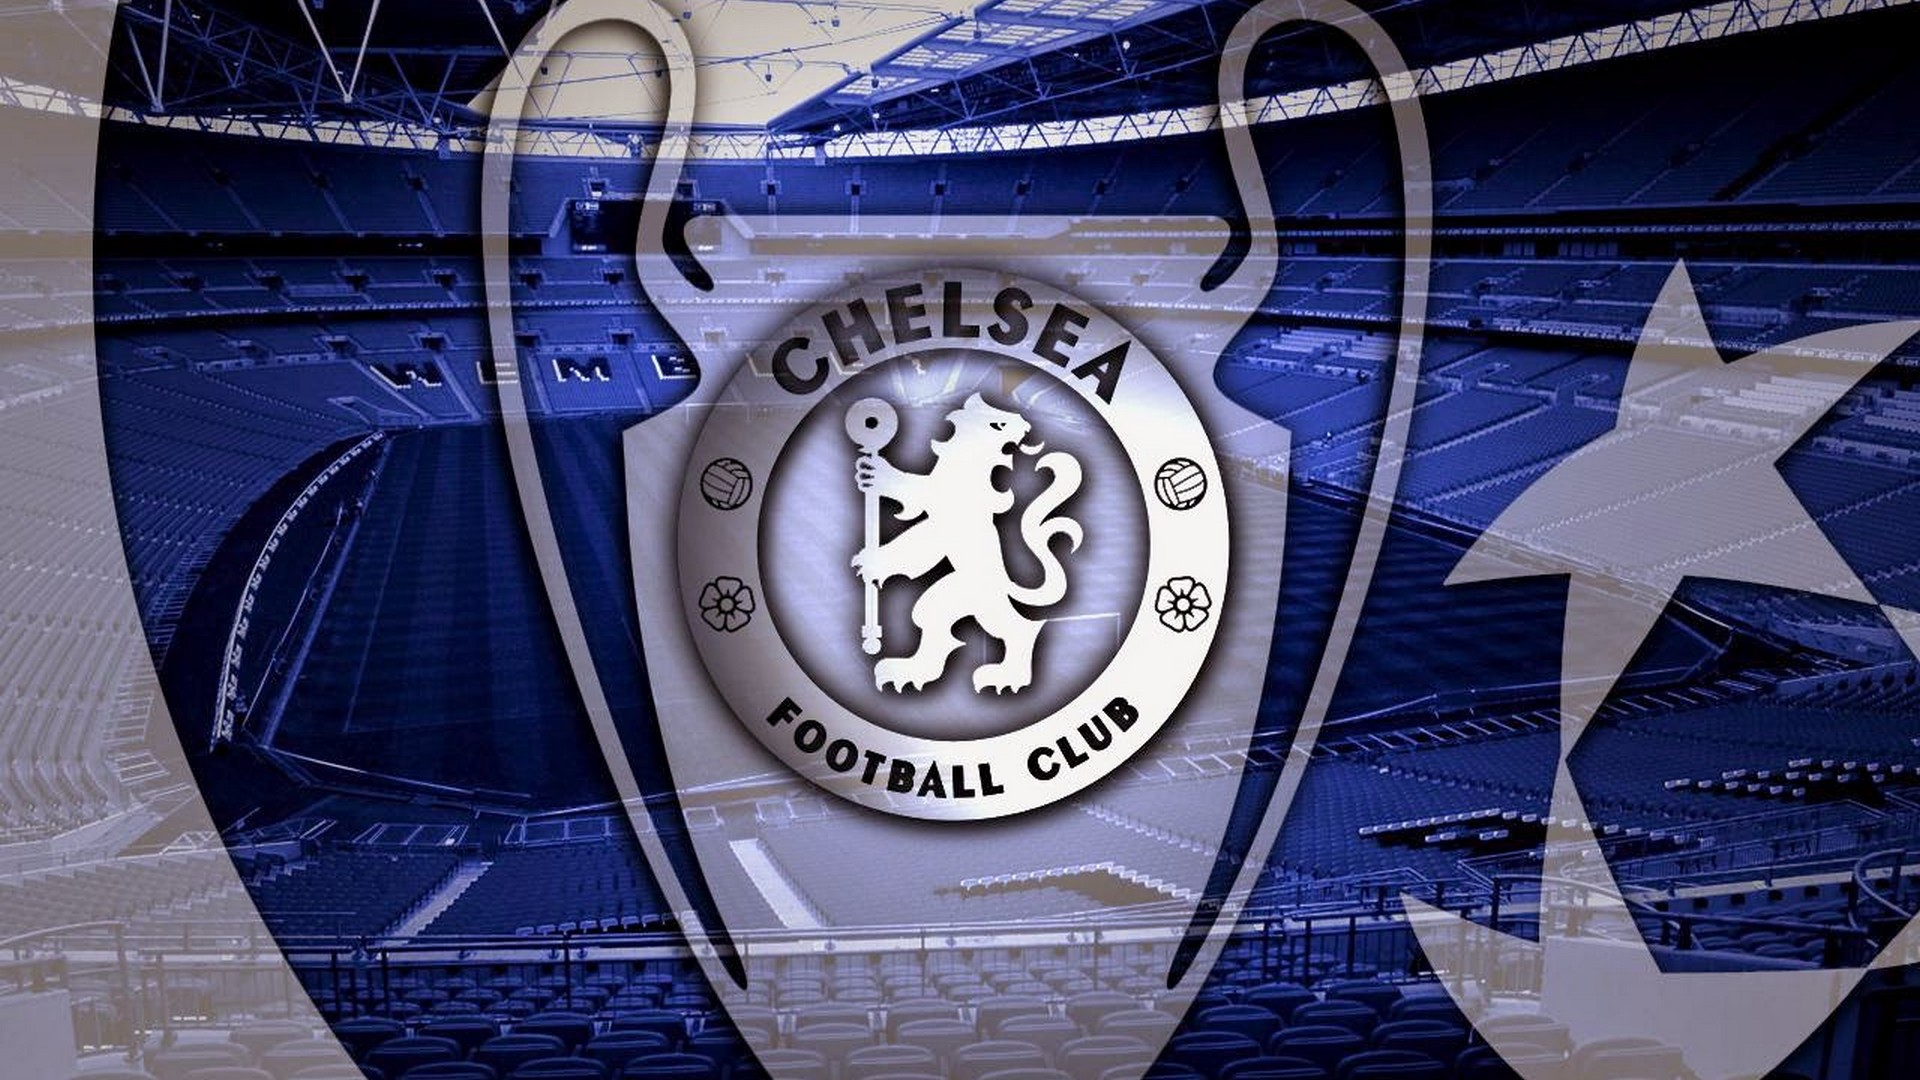 Chelsea Champions League Wallpaper With Resolution 1920X1080 pixel. You can make this wallpaper for your Mac or Windows Desktop Background, iPhone, Android or Tablet and another Smartphone device for free